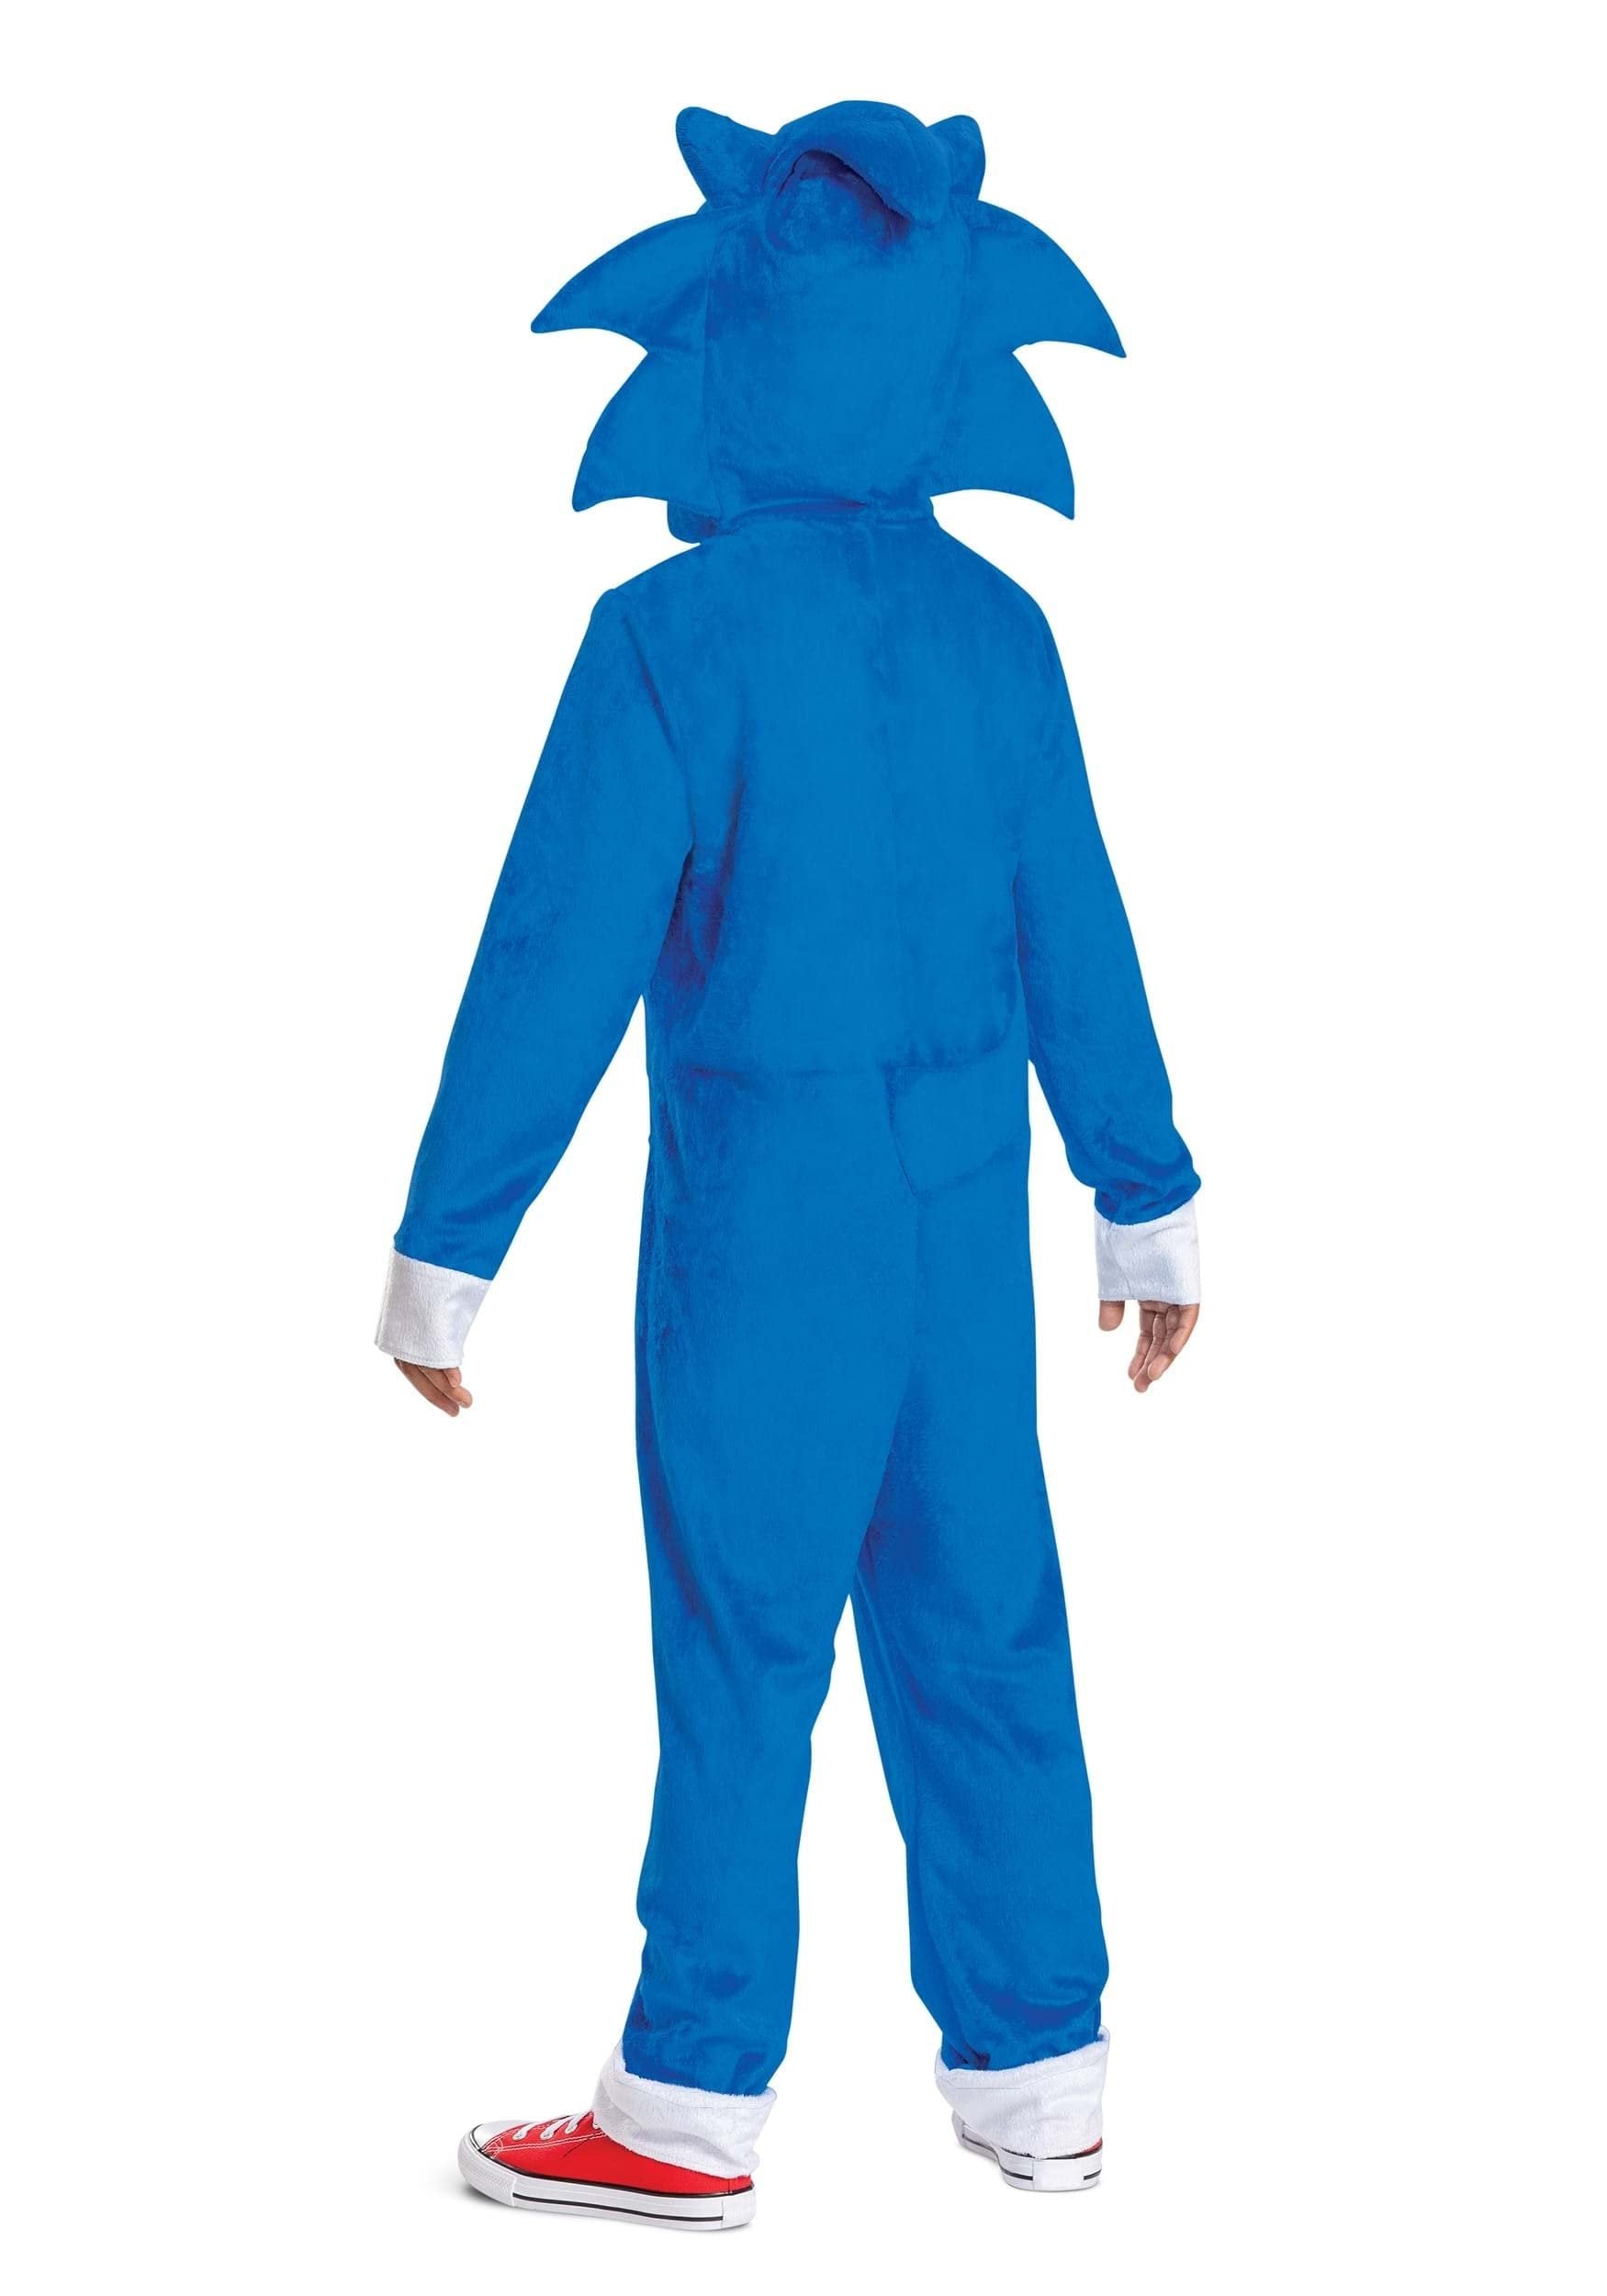 Sonic the Hedgehog Costume, Official Sonic Movie Costume and Headpiece, Kids Size Medium (7-8)